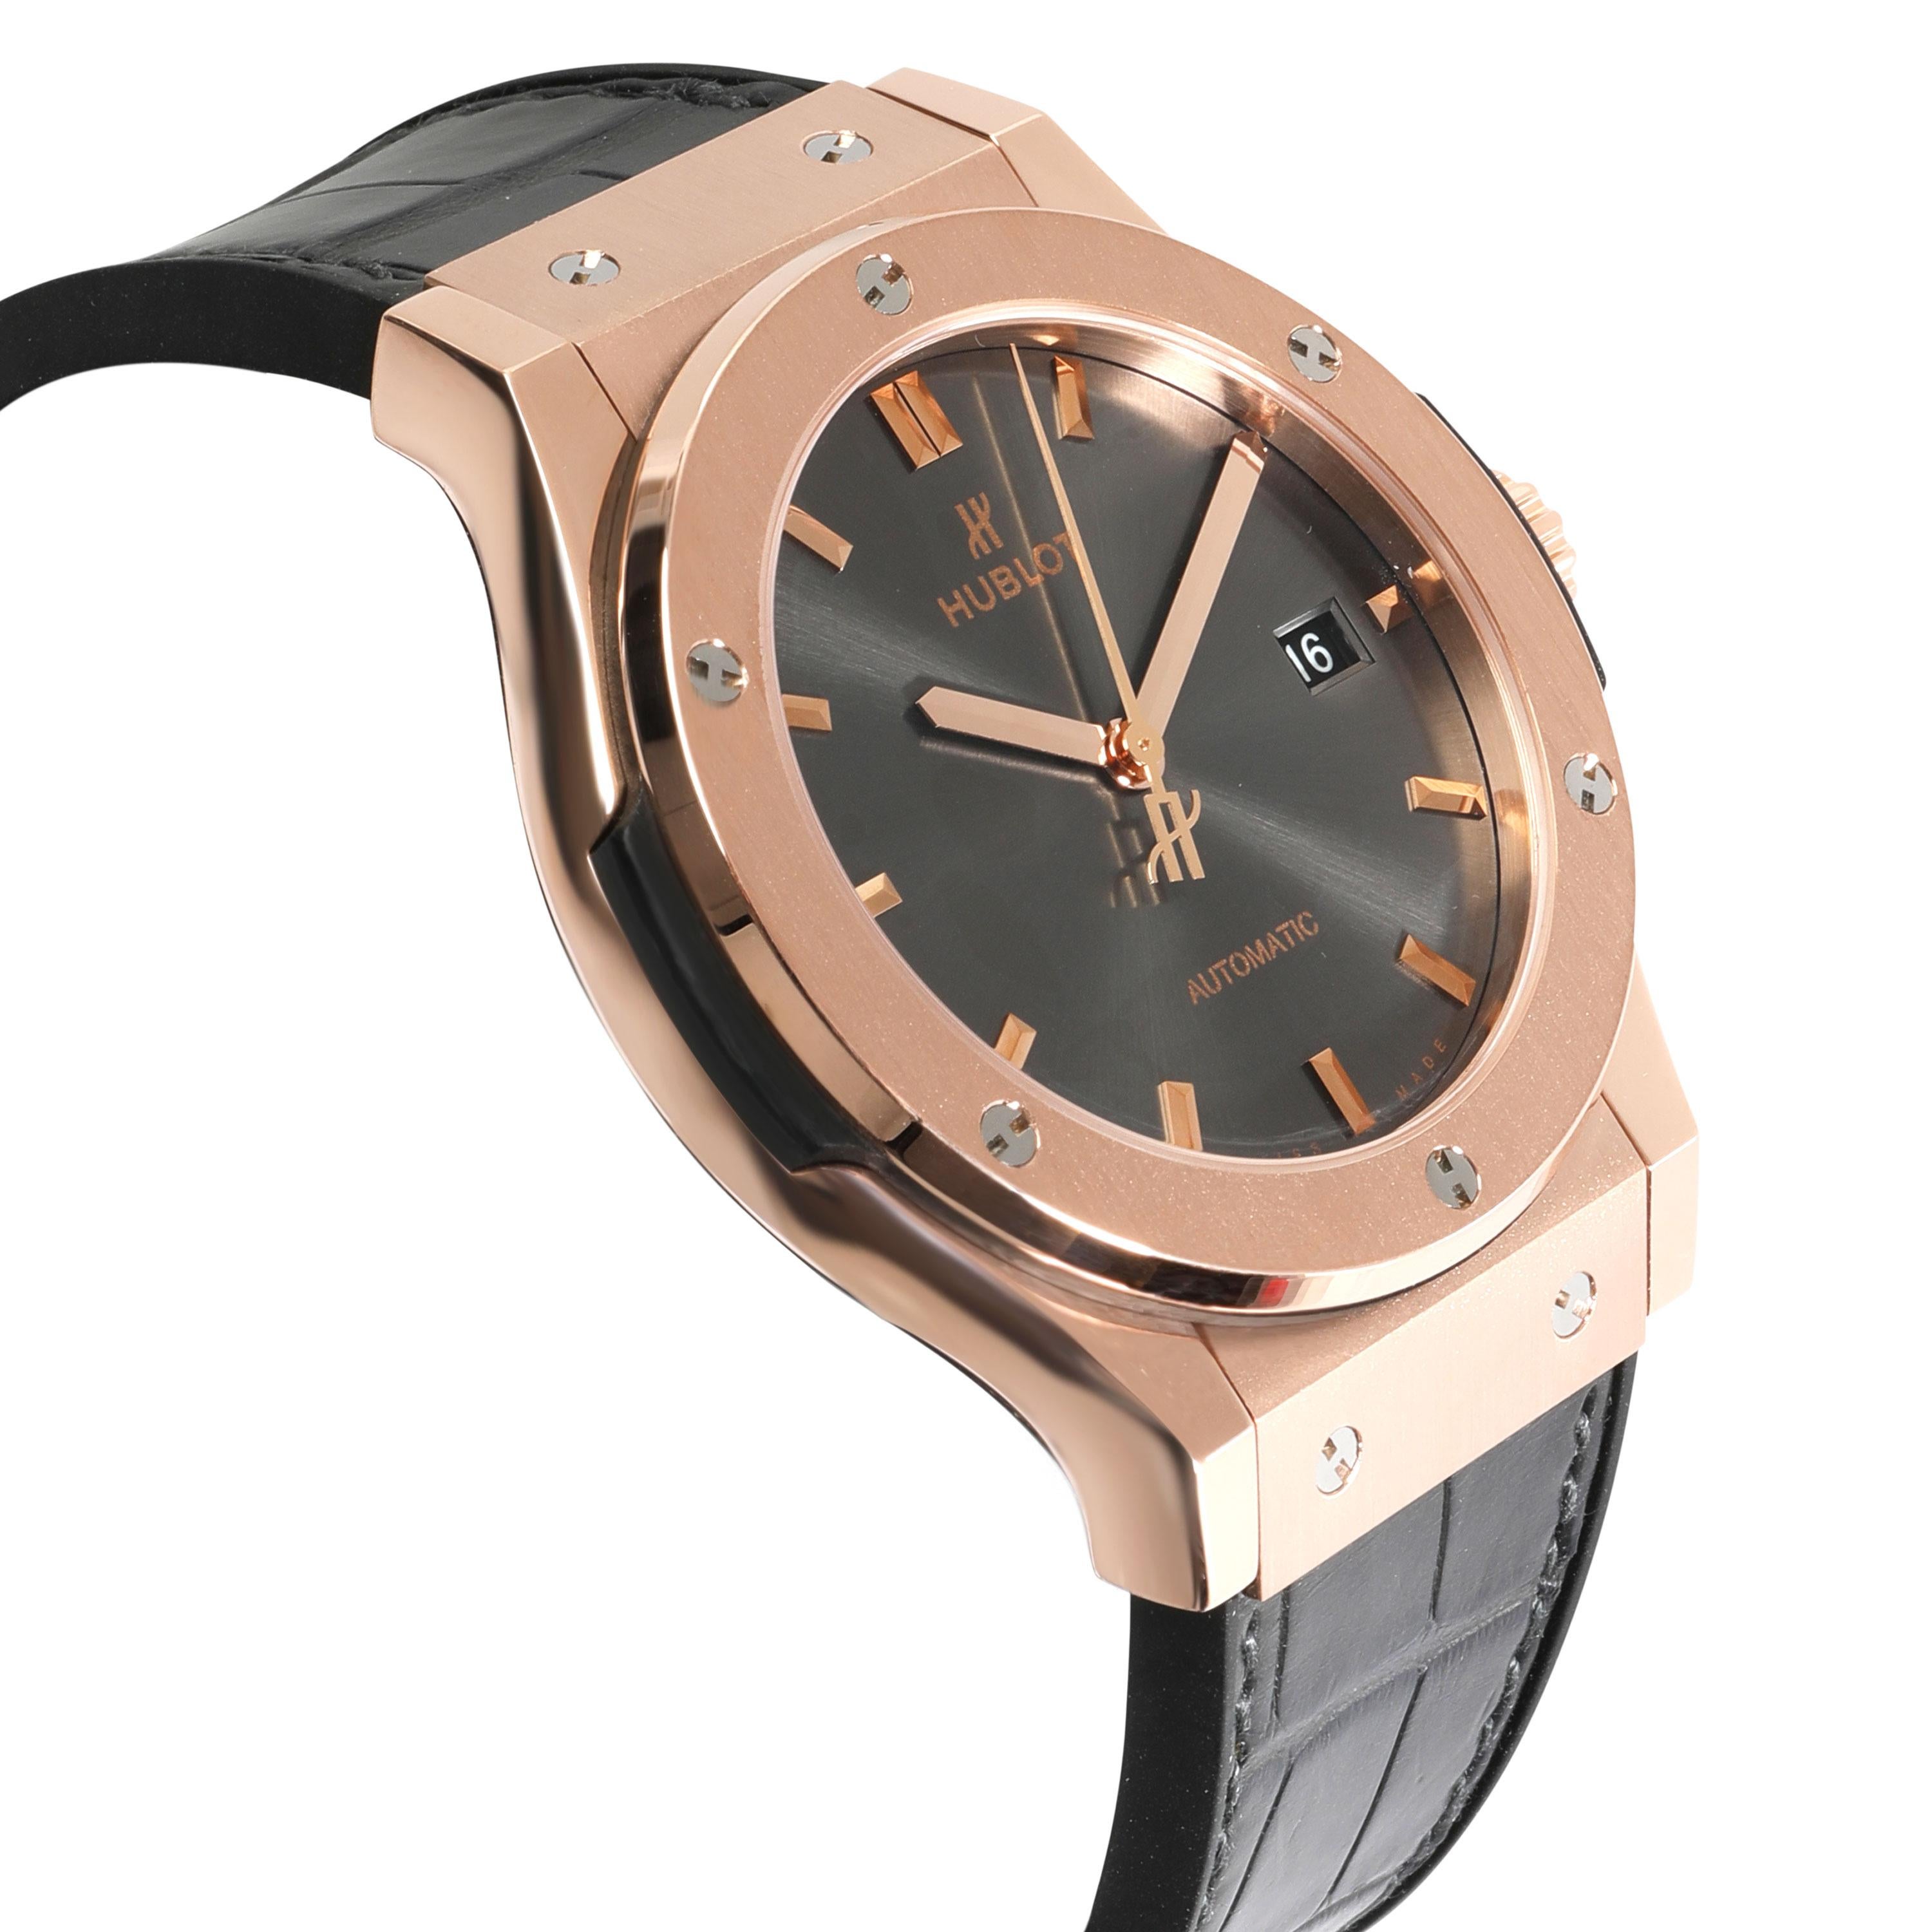 Hublot Classic Fusion Racing Gray 542.OX.7081.LR Men's Watch in 18kt Rose Gold 2